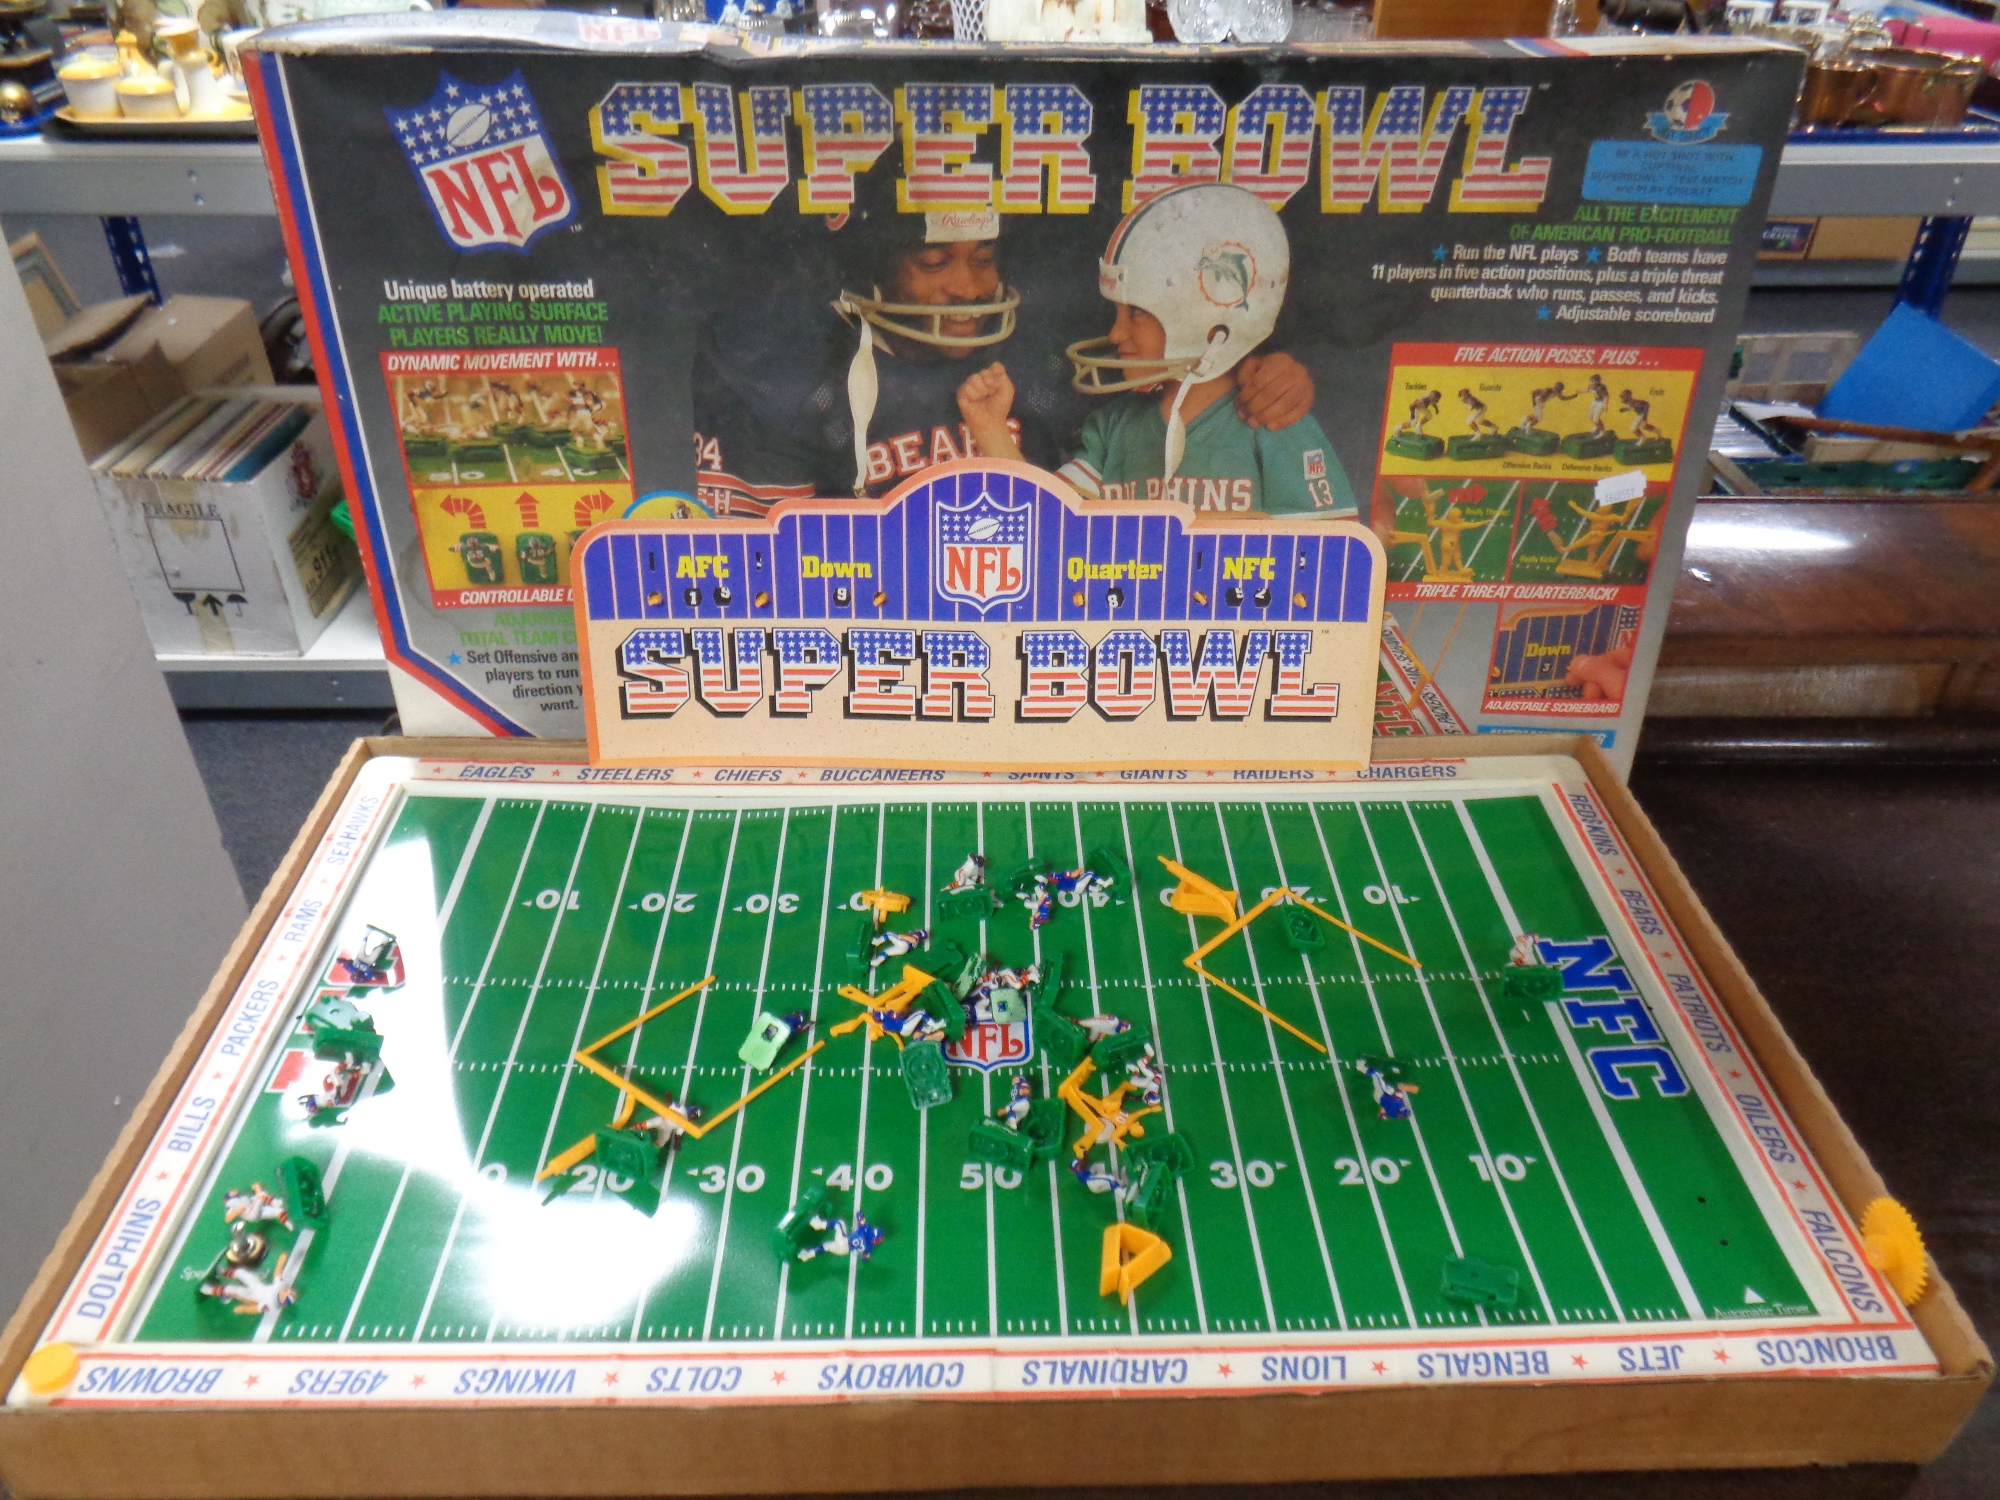 A Peter Pan Playthings super bowl board game